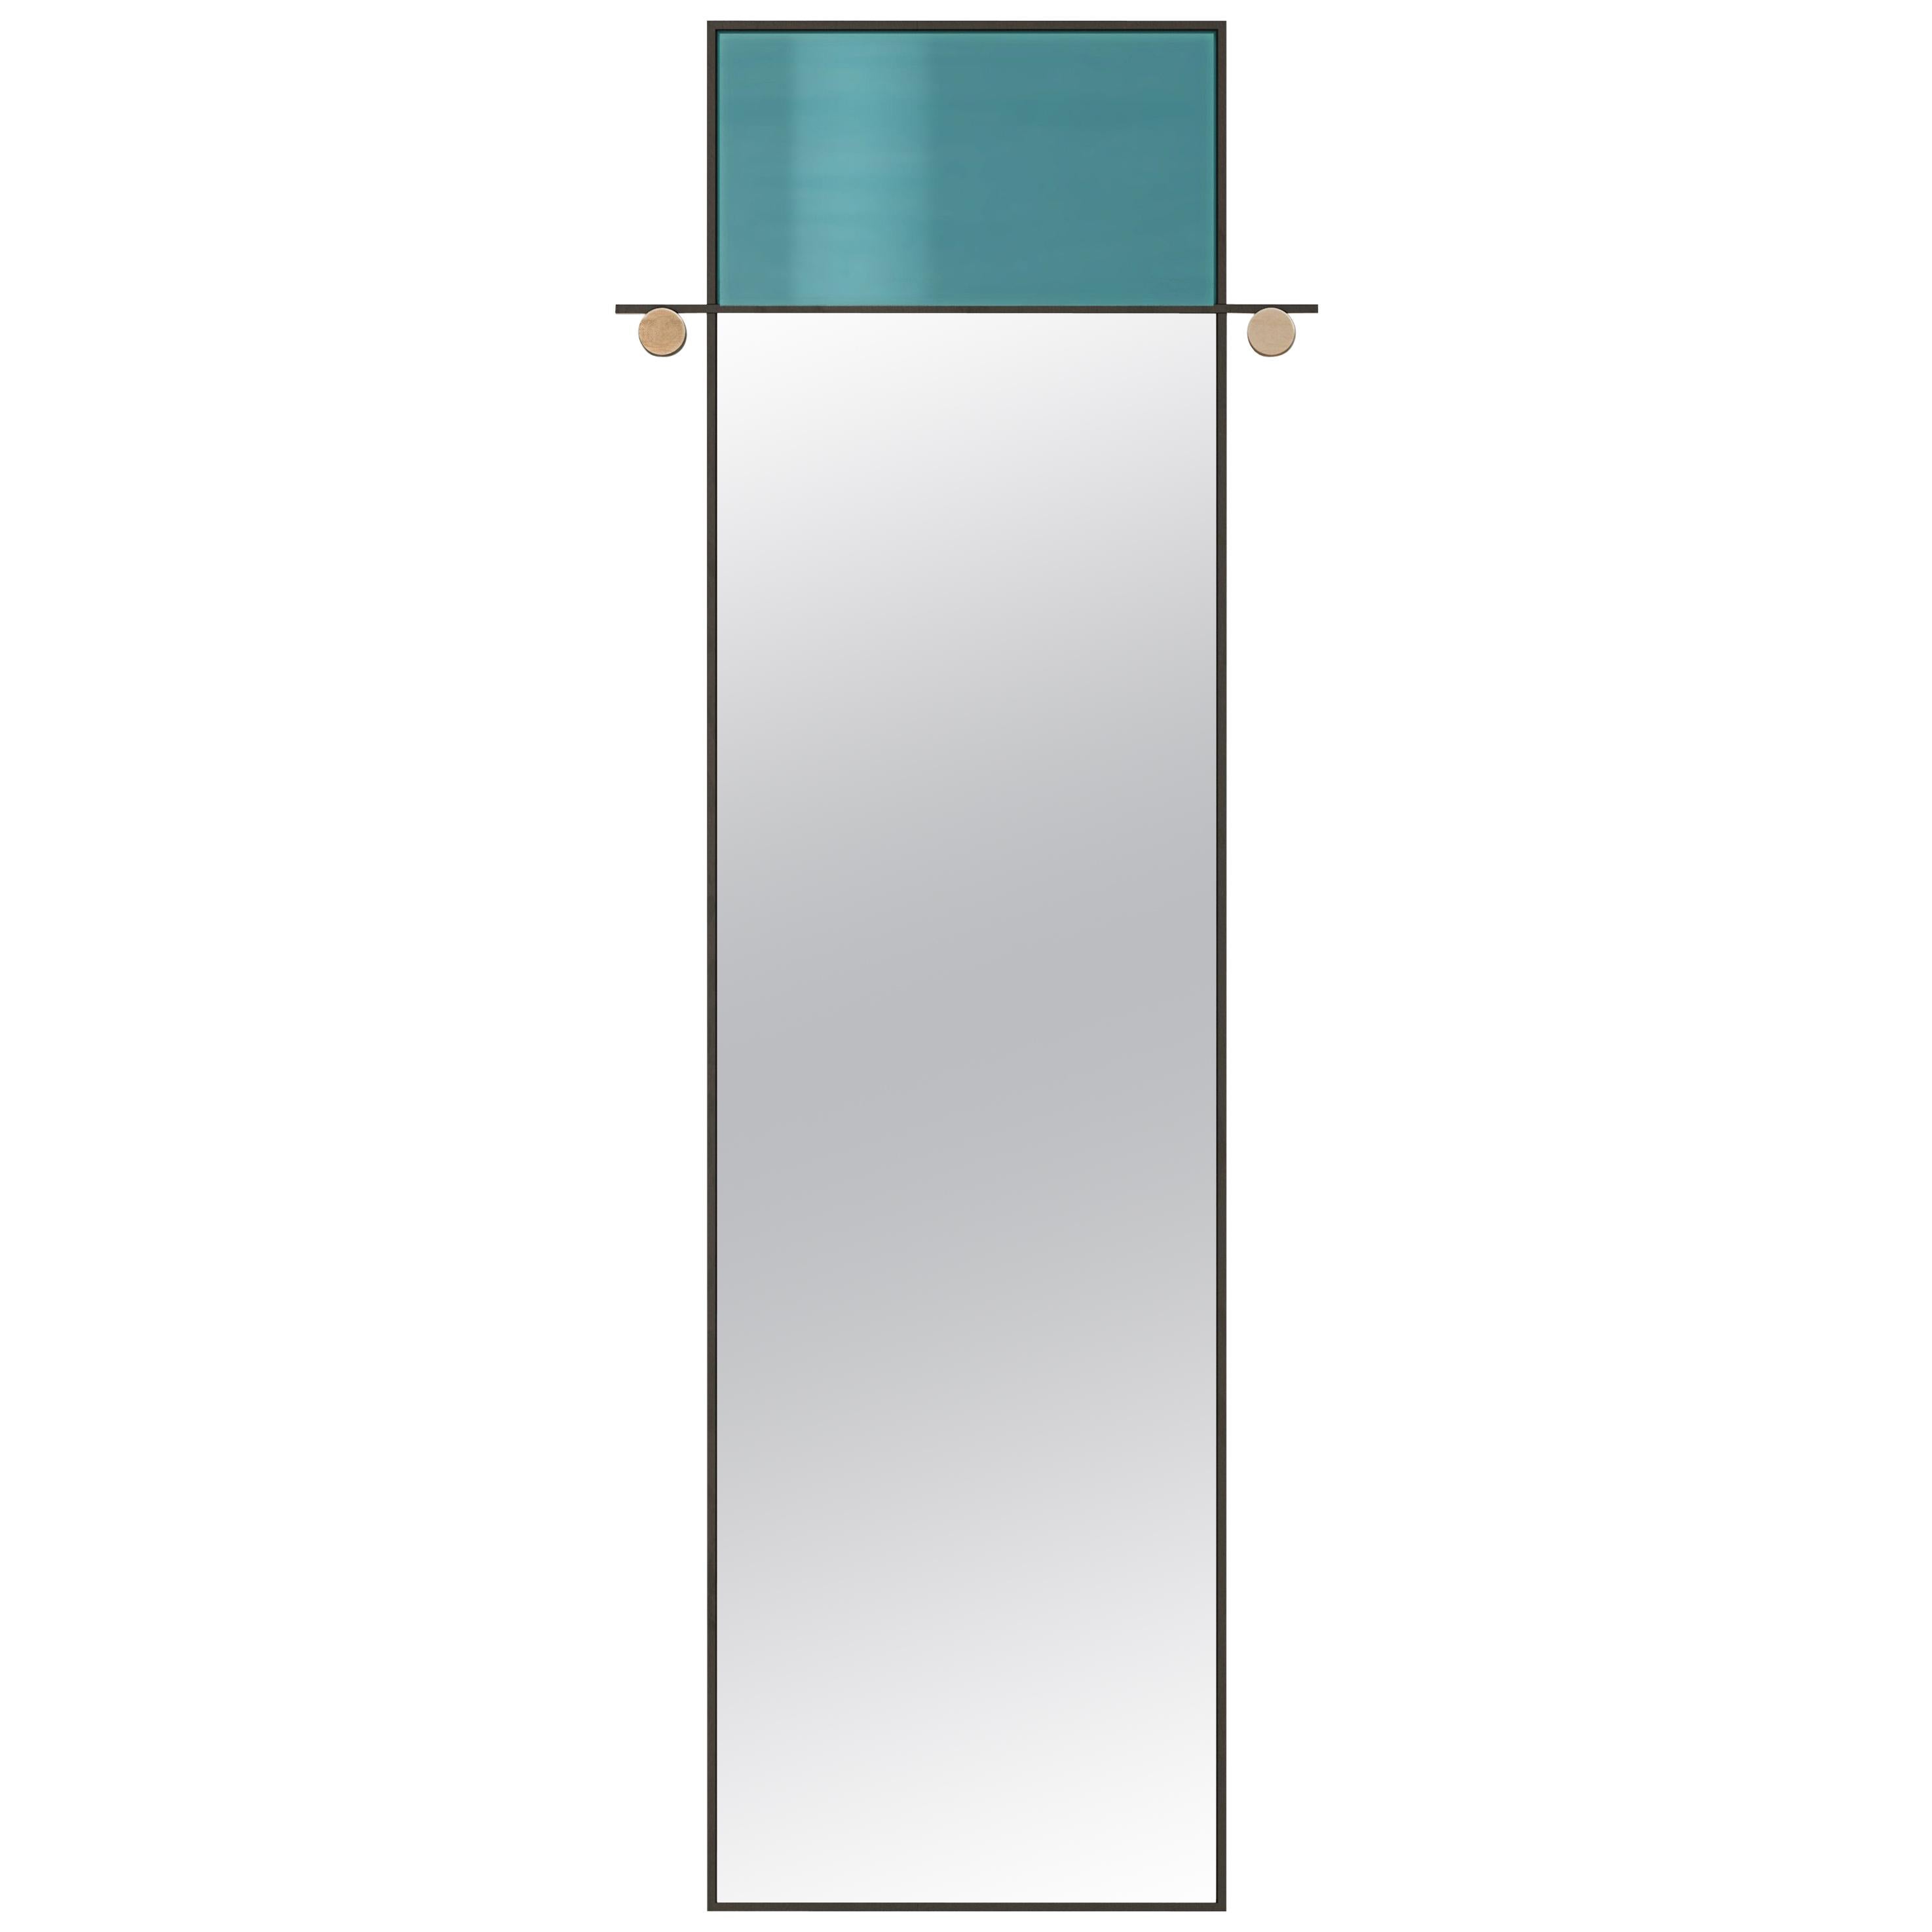 Abal Tall Mirror with Teal Glass by Matter Made For Sale